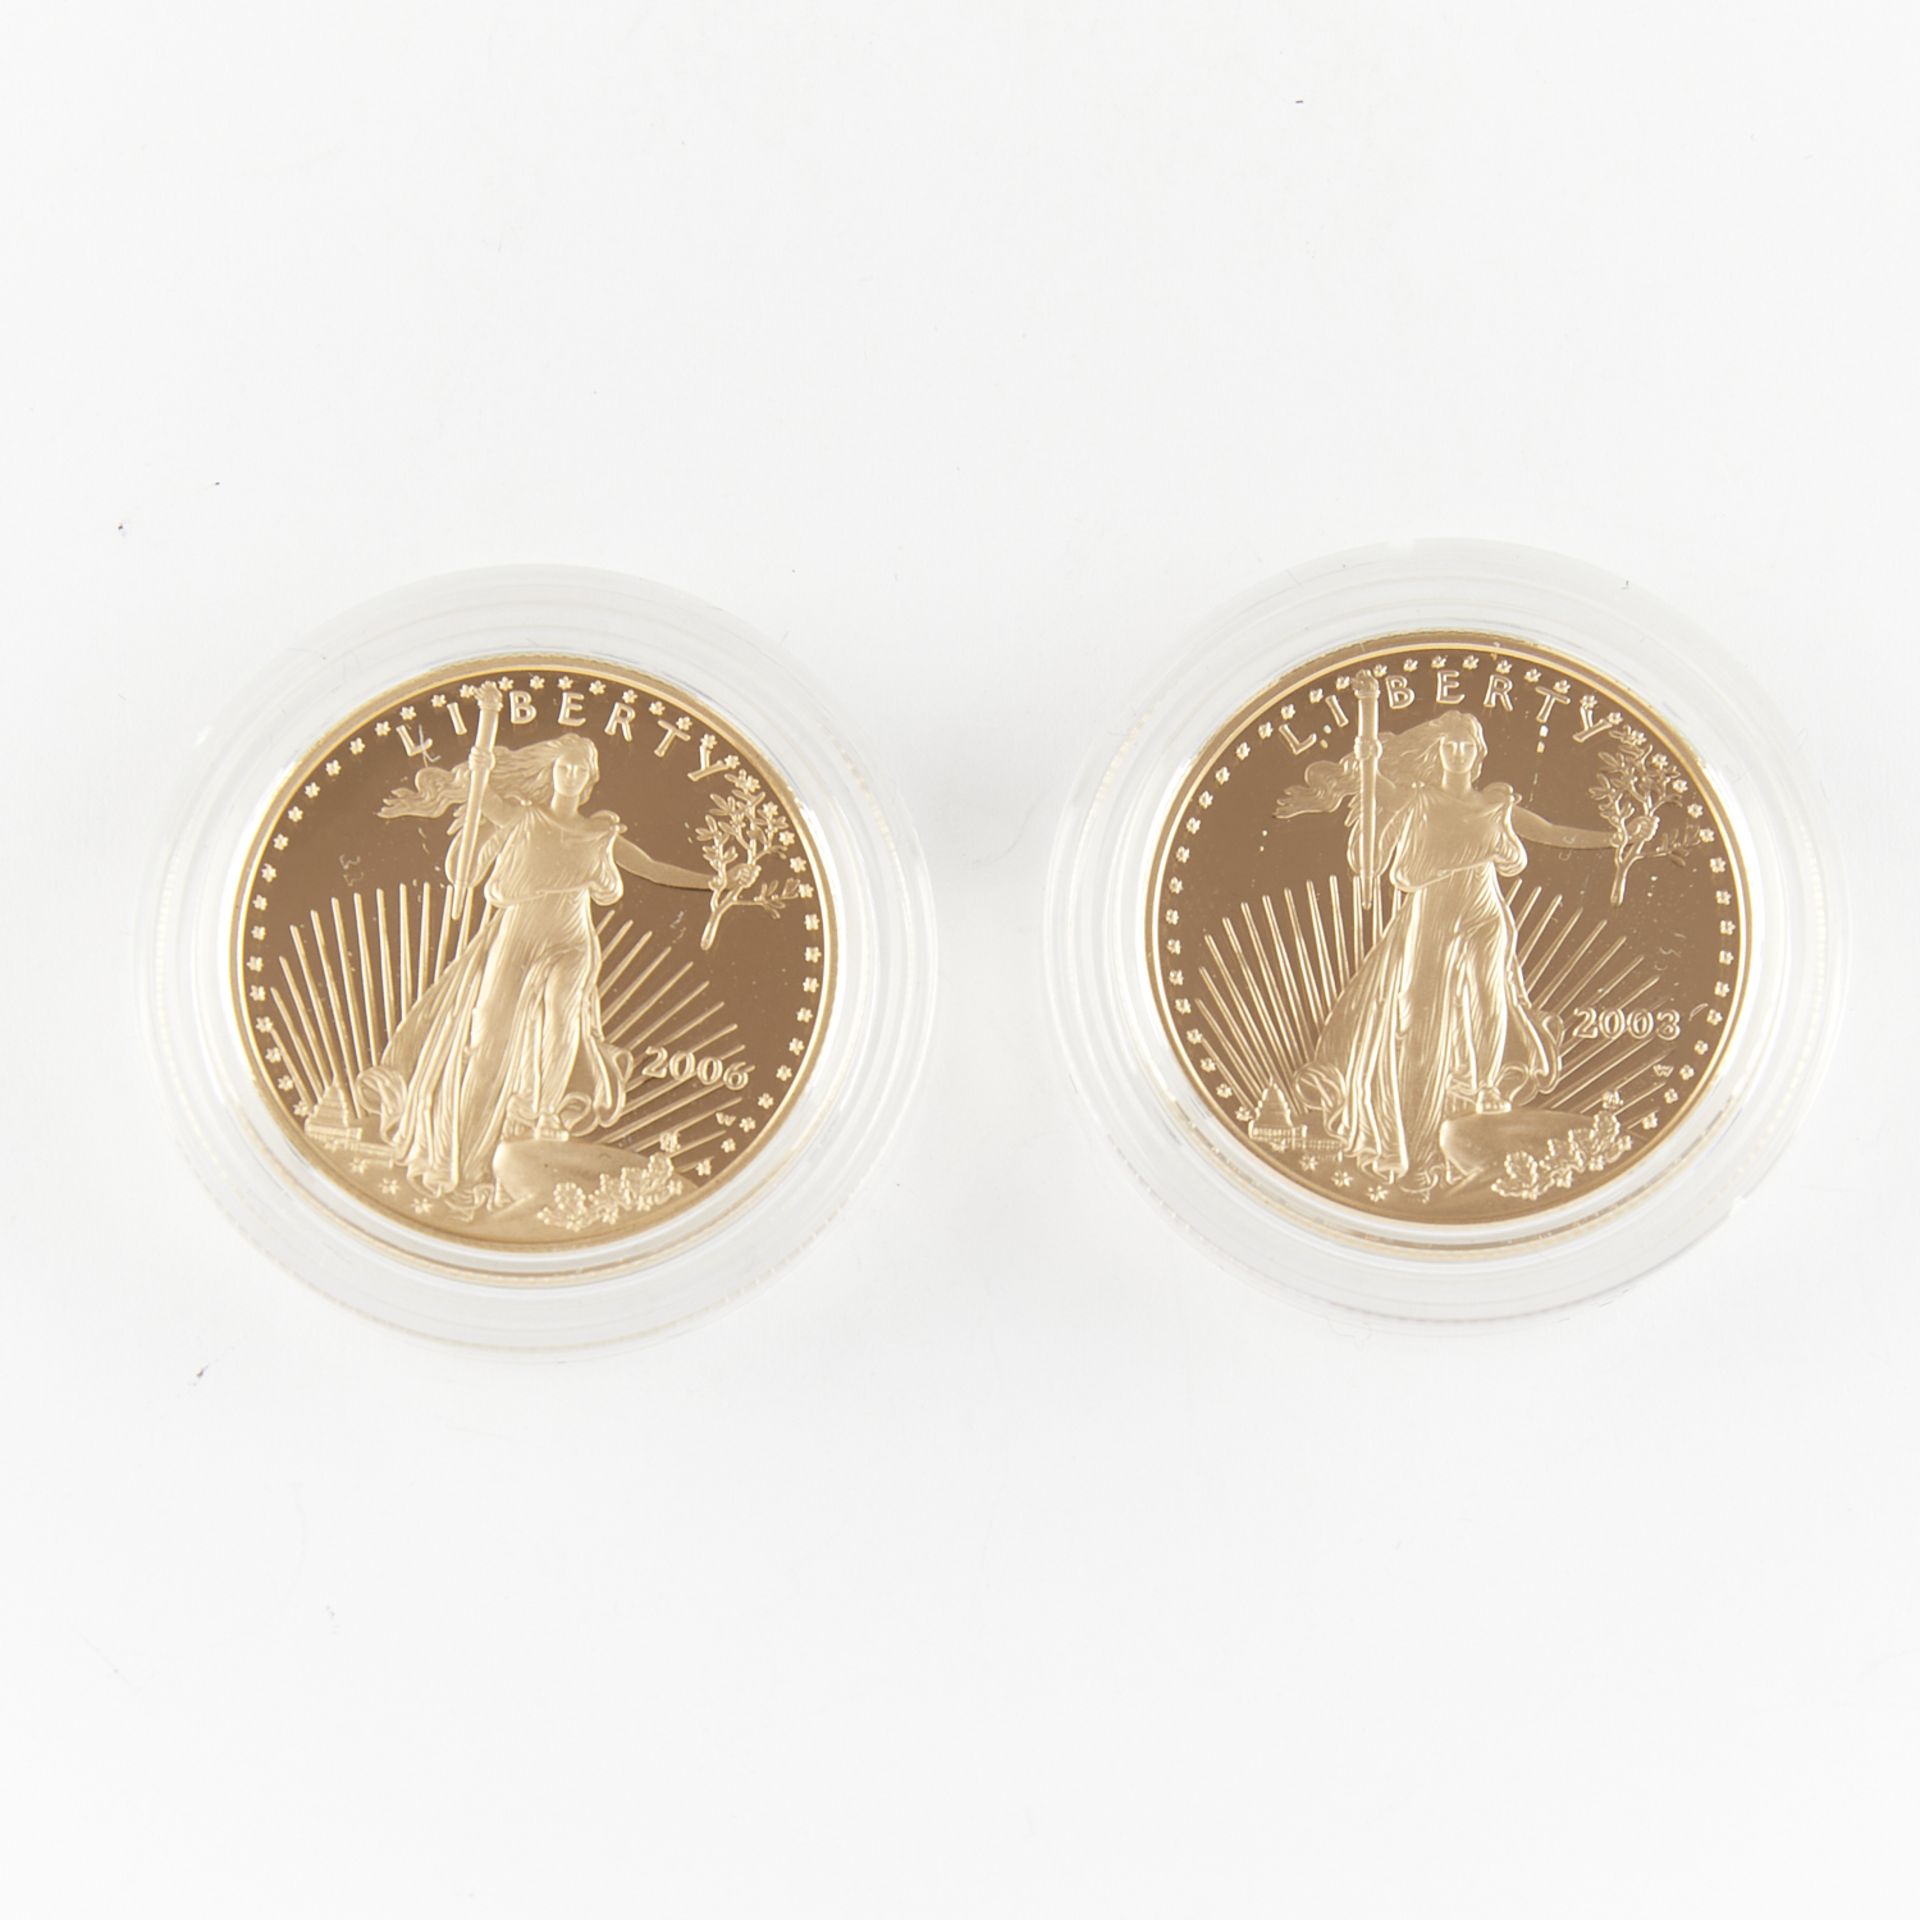 Group 2 $25 Gold American Eagle Proof Coins - Image 2 of 3